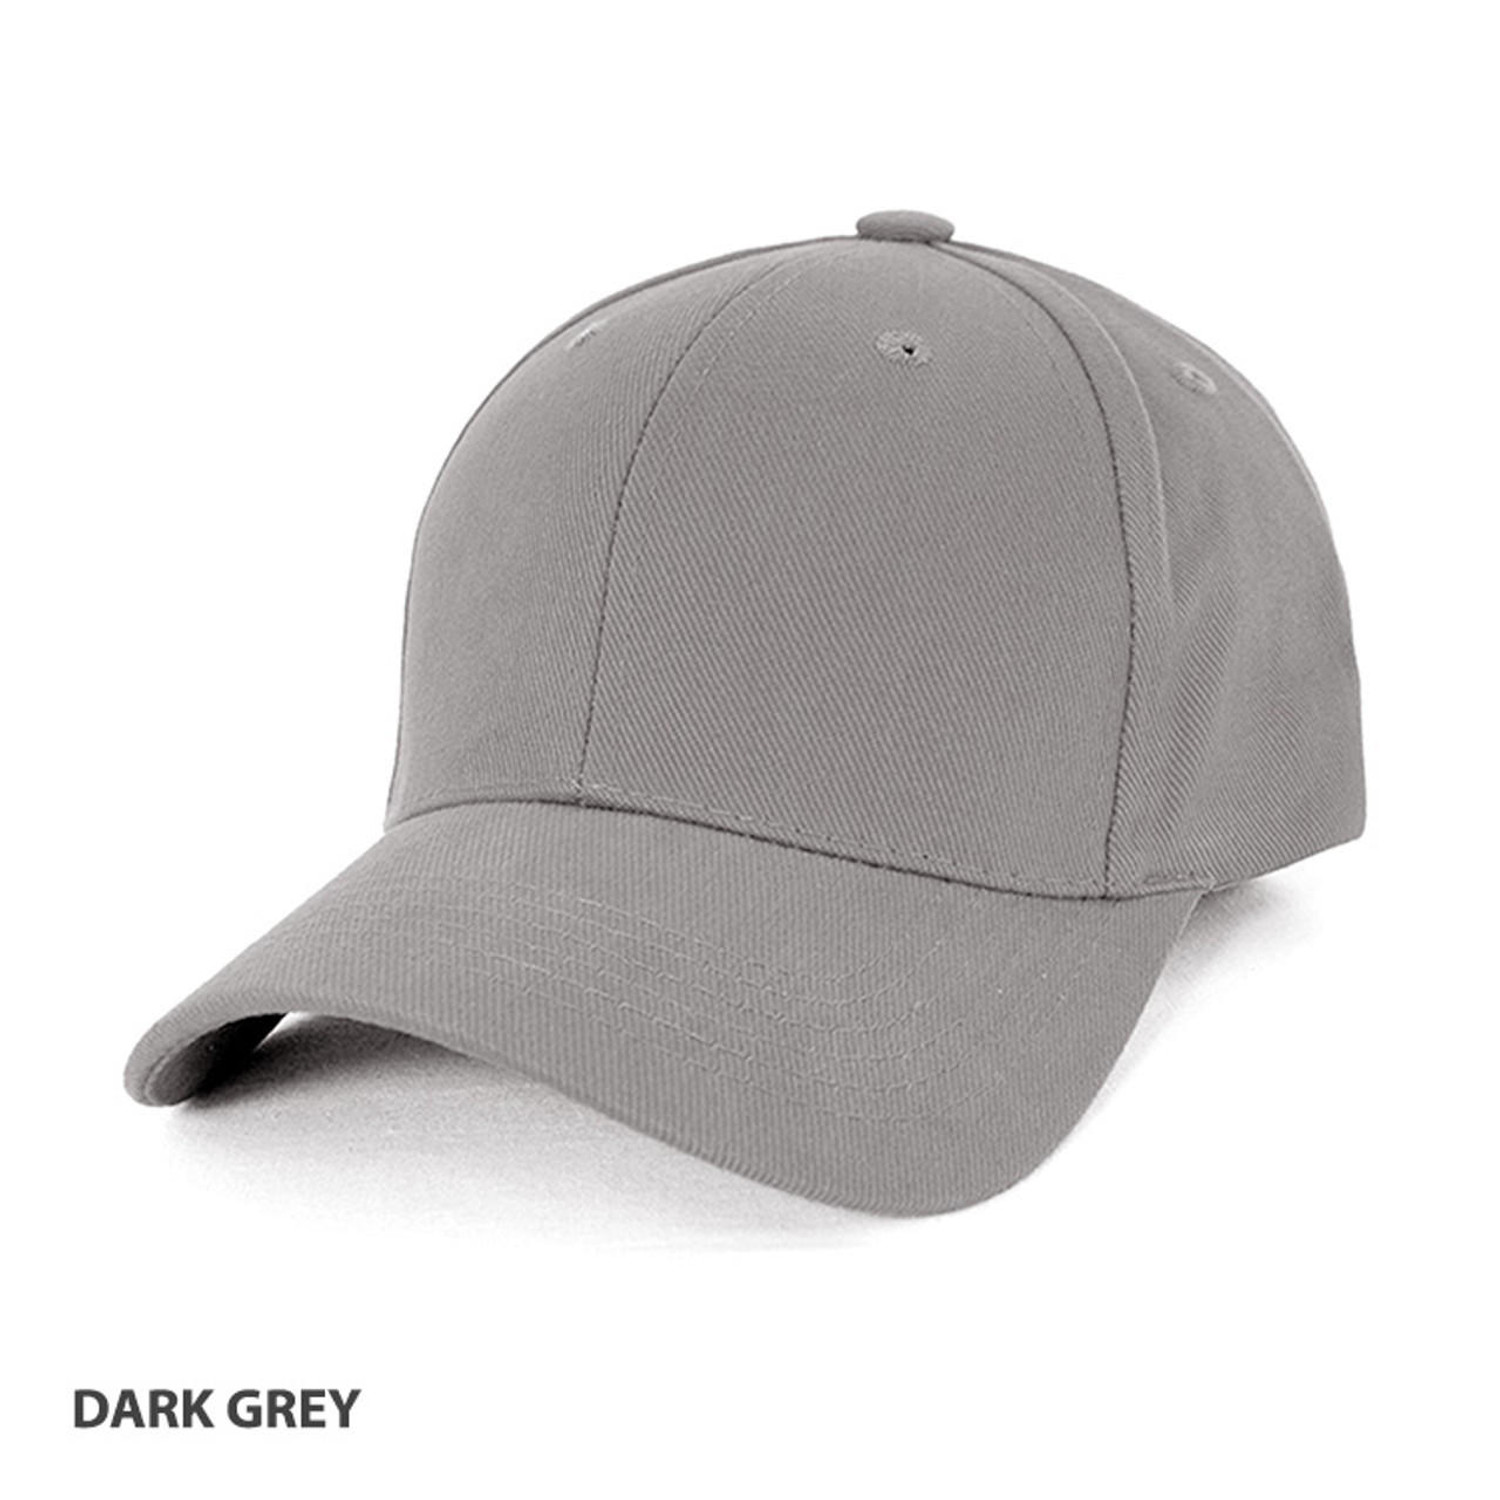  FREE EMBROIDERY - Heavy Brushed Cotton Cap in Dark Grey (Buy 20+) 